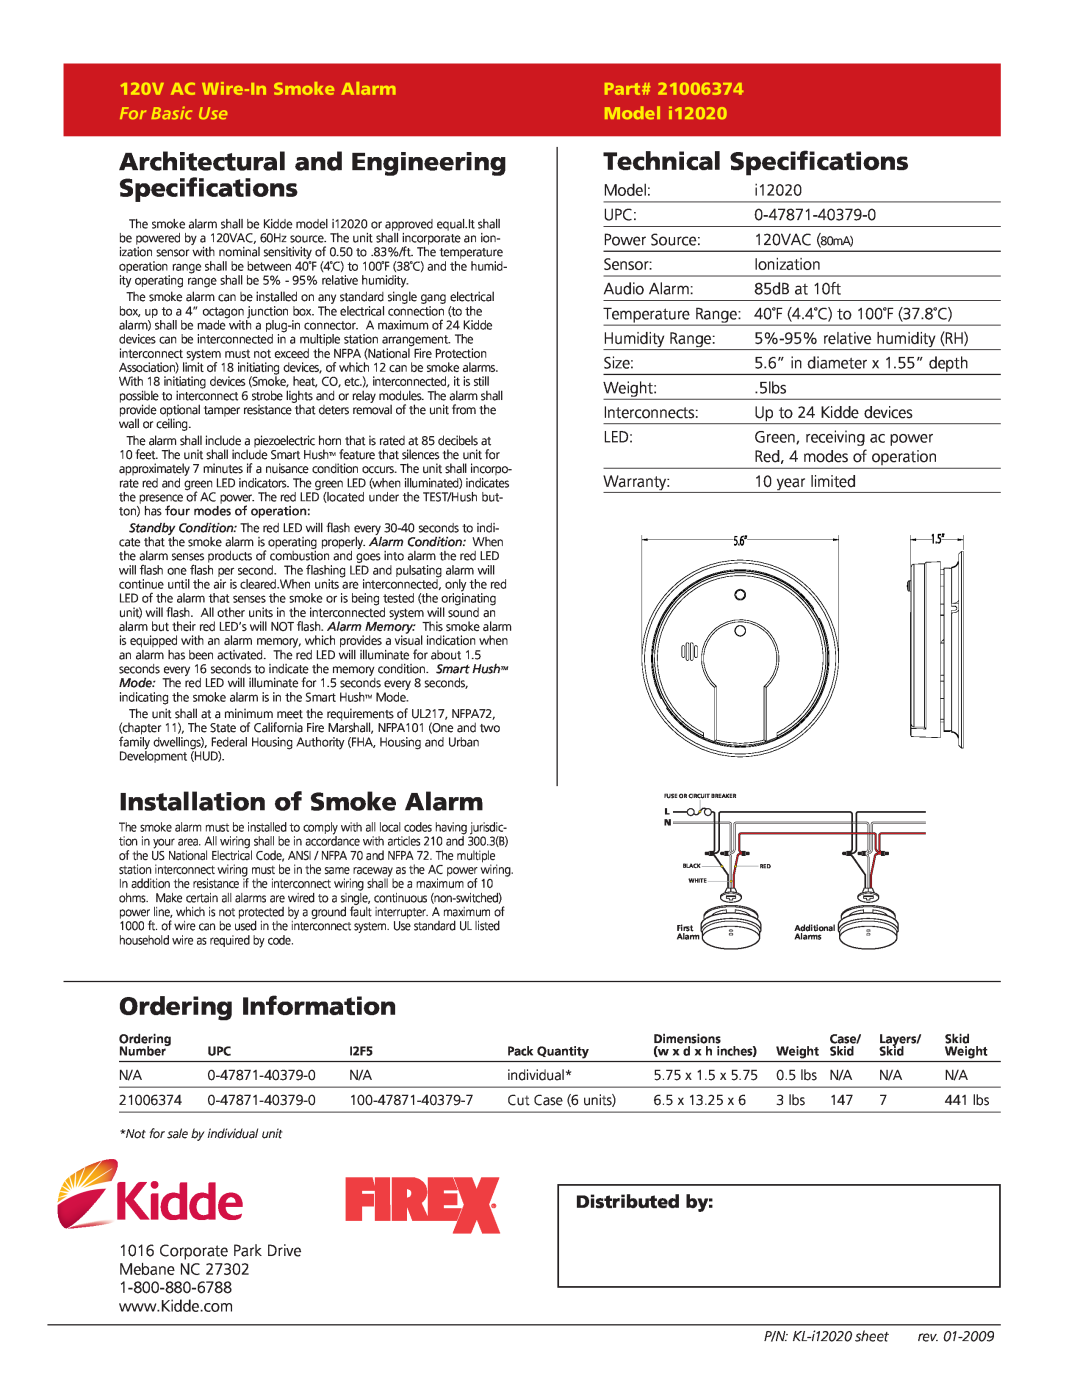 Kidde I12020 warranty Architectural and Engineering Specifications, Installation of Smoke Alarm, Technical Specifications 